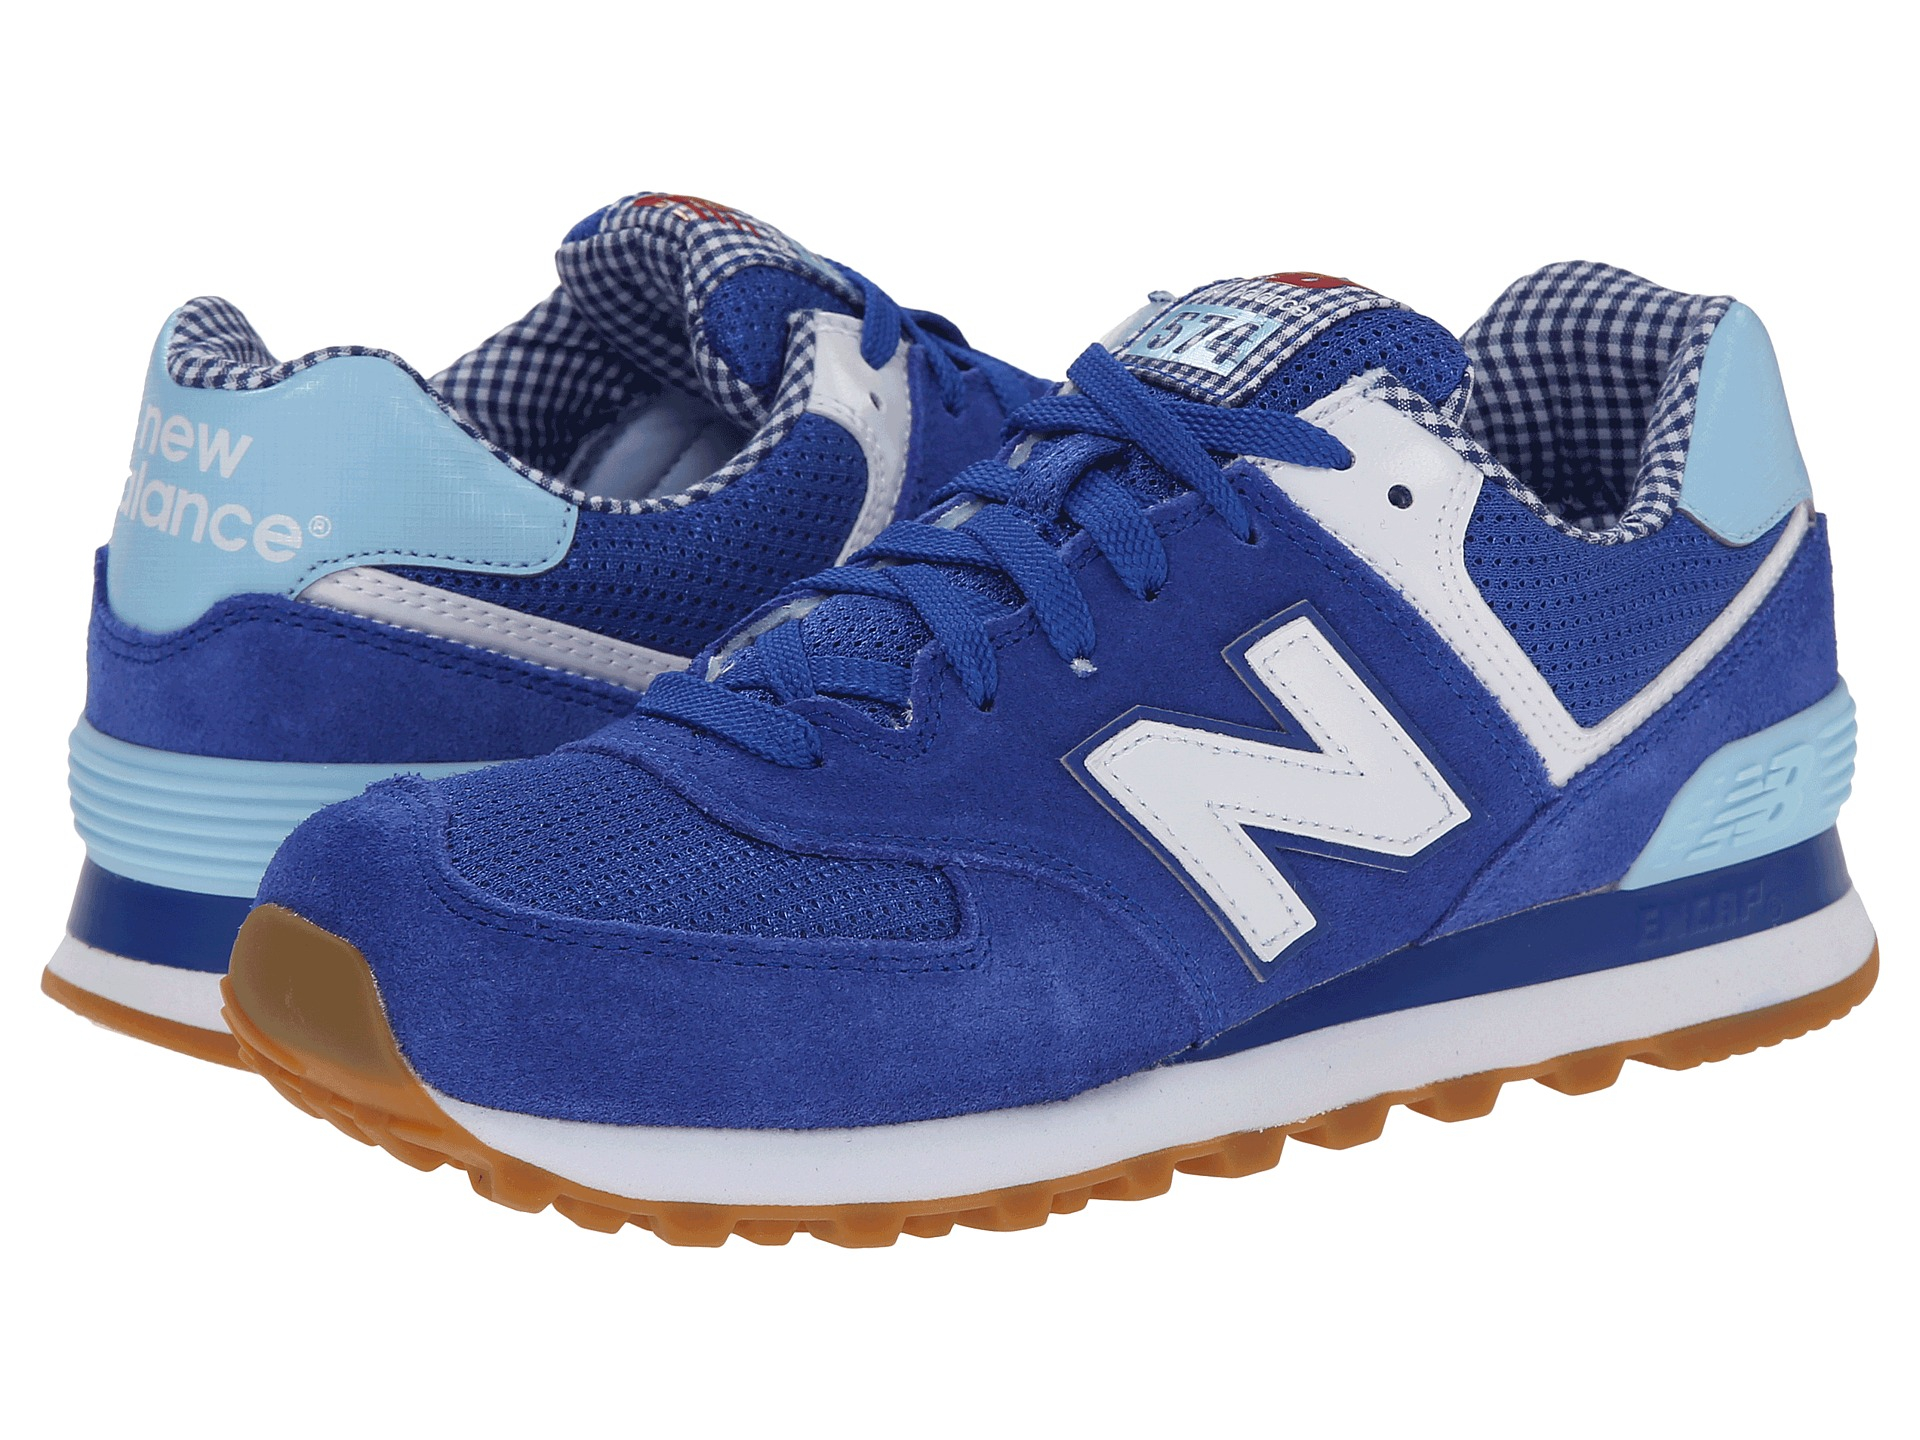 New Balance Wl574 - Picnic Collection in Blue - Lyst